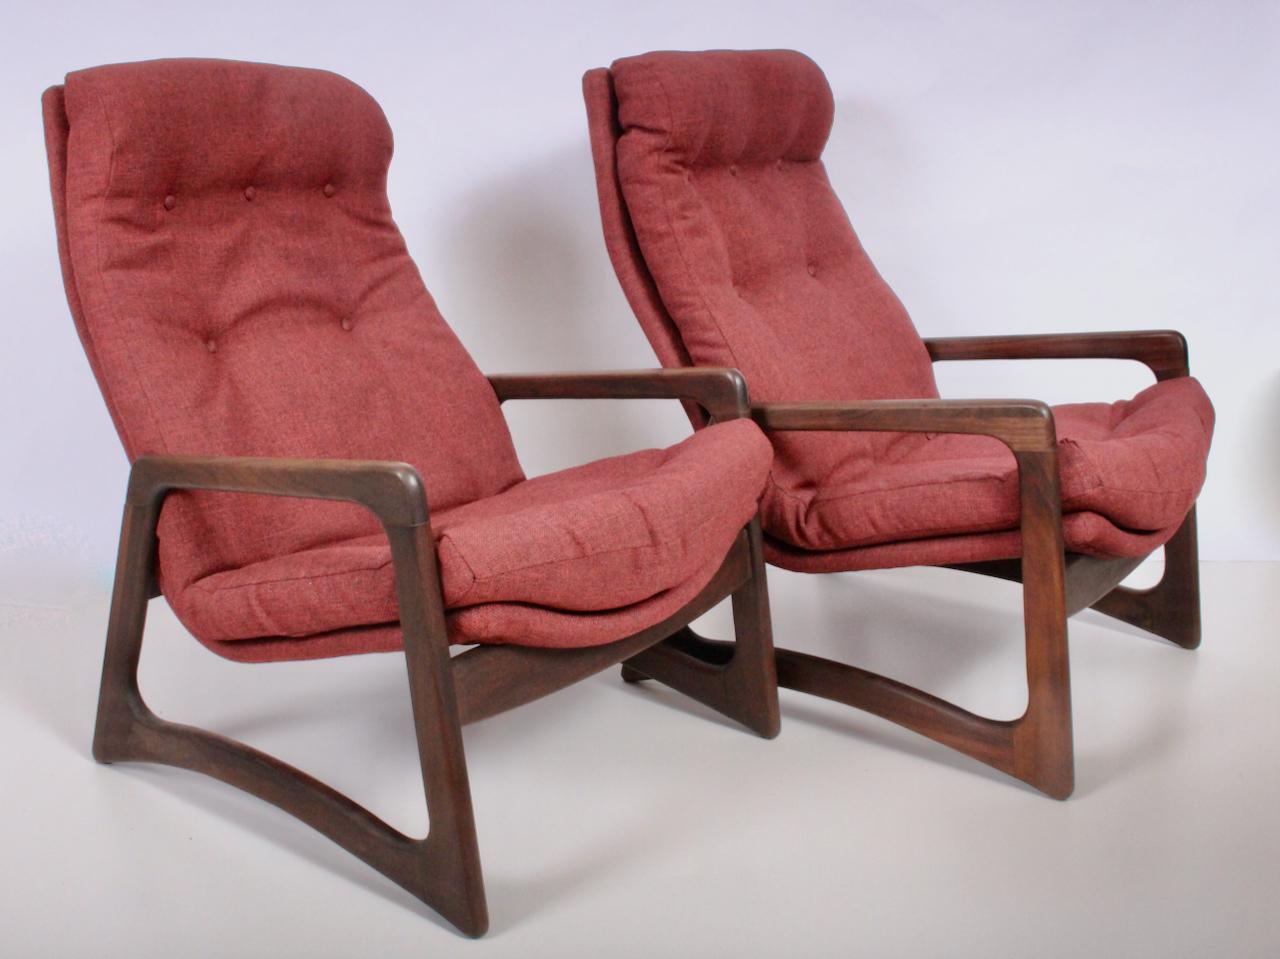 Mid-Century Modern Pair of Adrian Pearsall for Craft Associates Walnut Lounge Chairs, 1960's For Sale